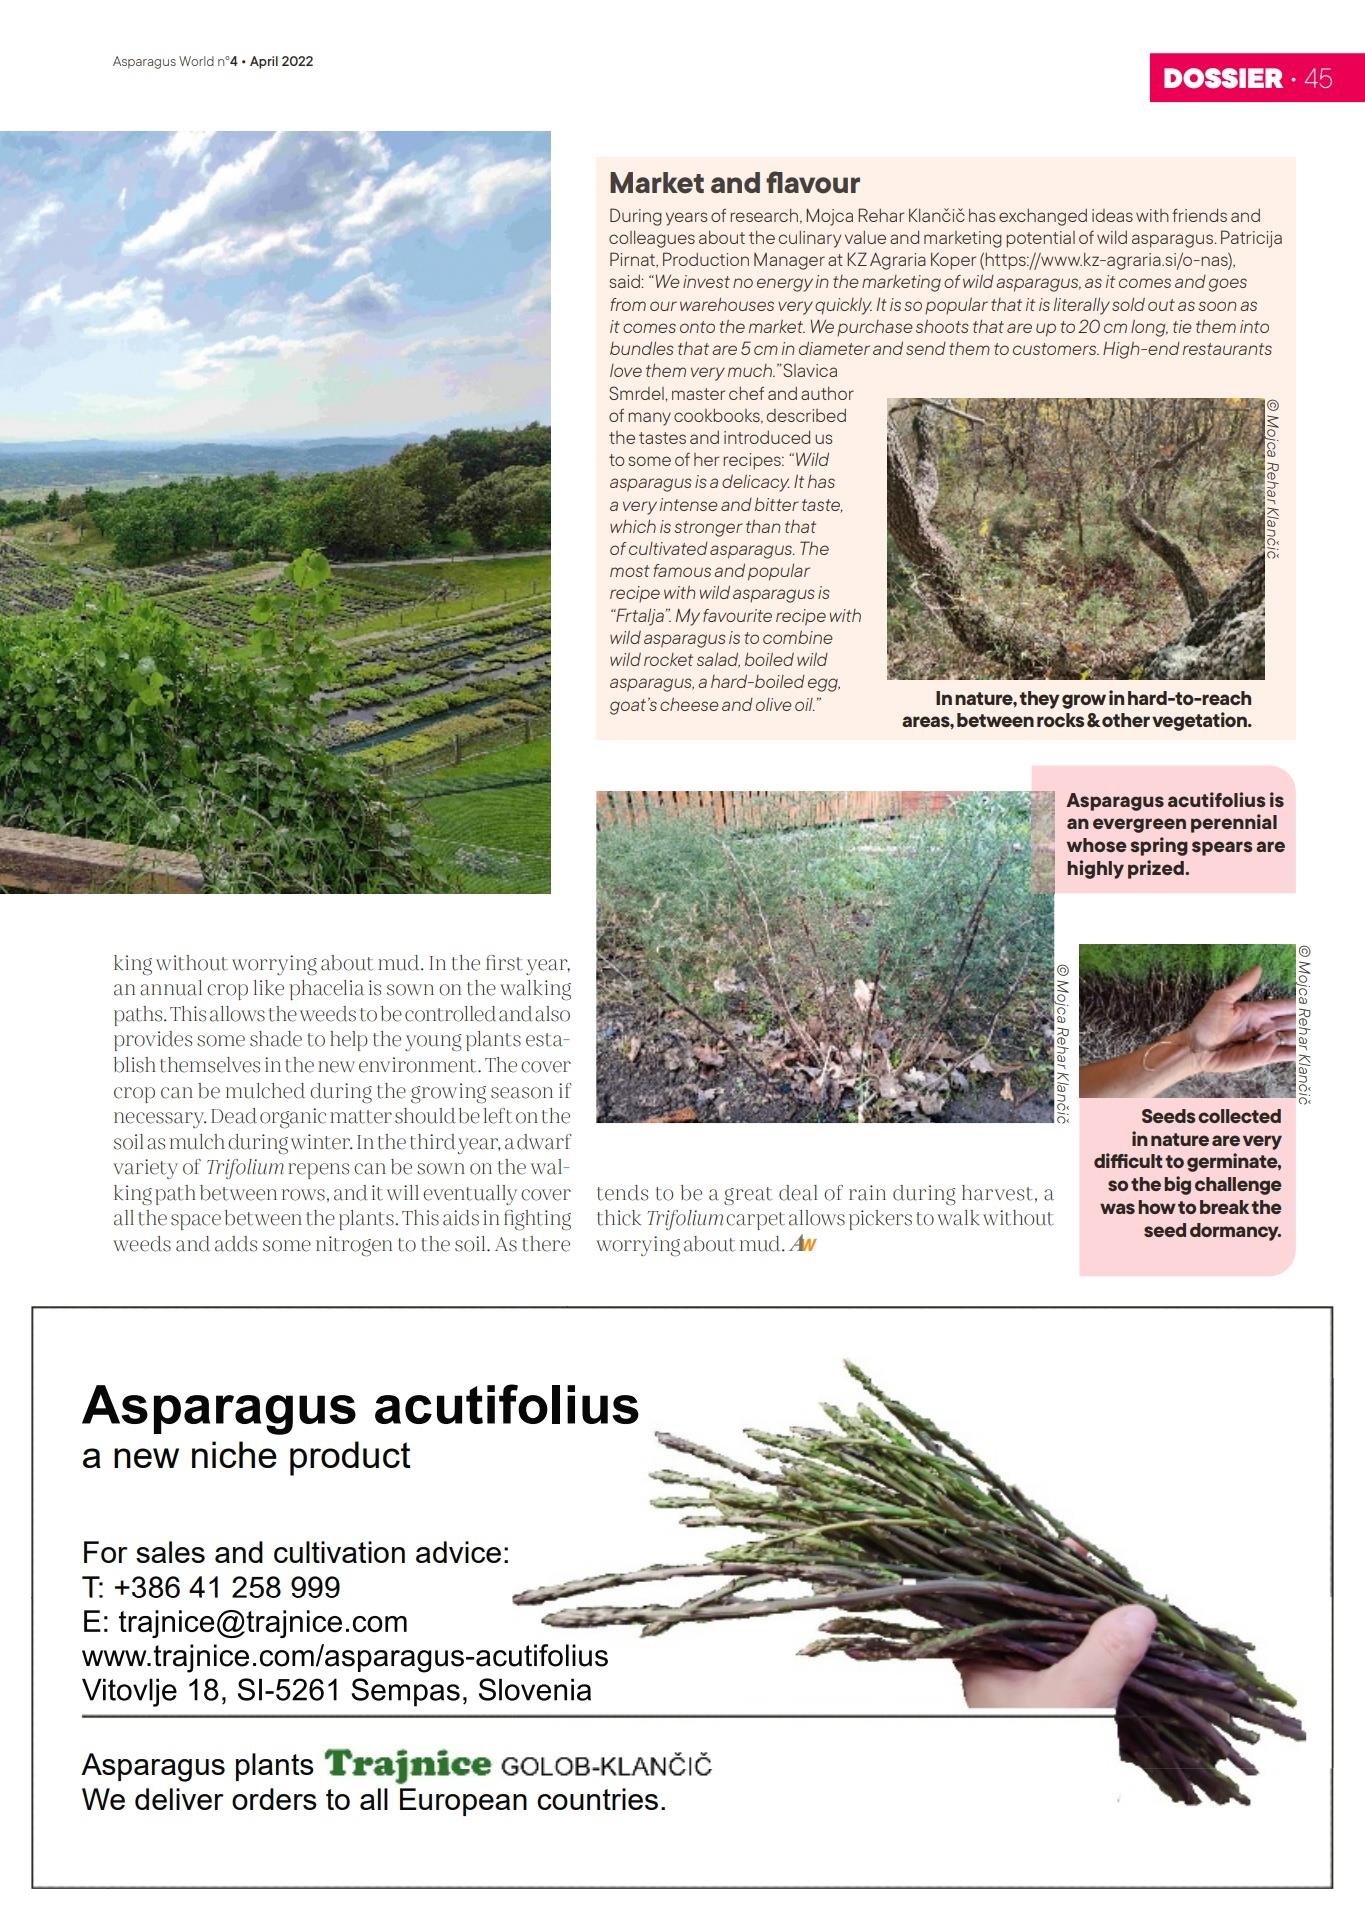 Our article about wild asparagus